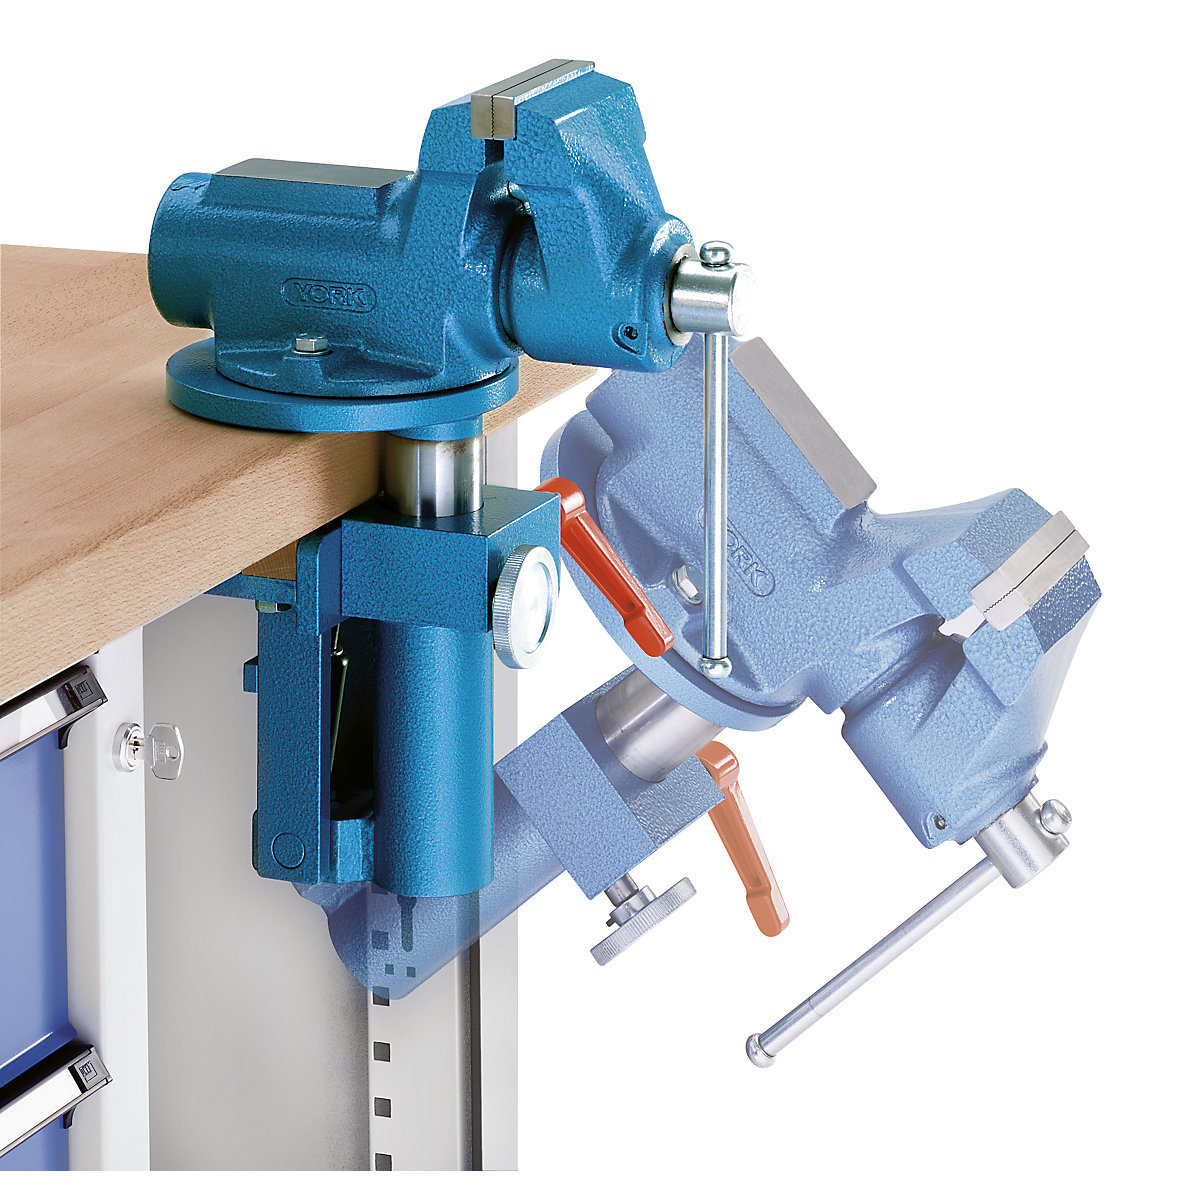 Compact workbench, mobile – ANKE (Product illustration 3)-2